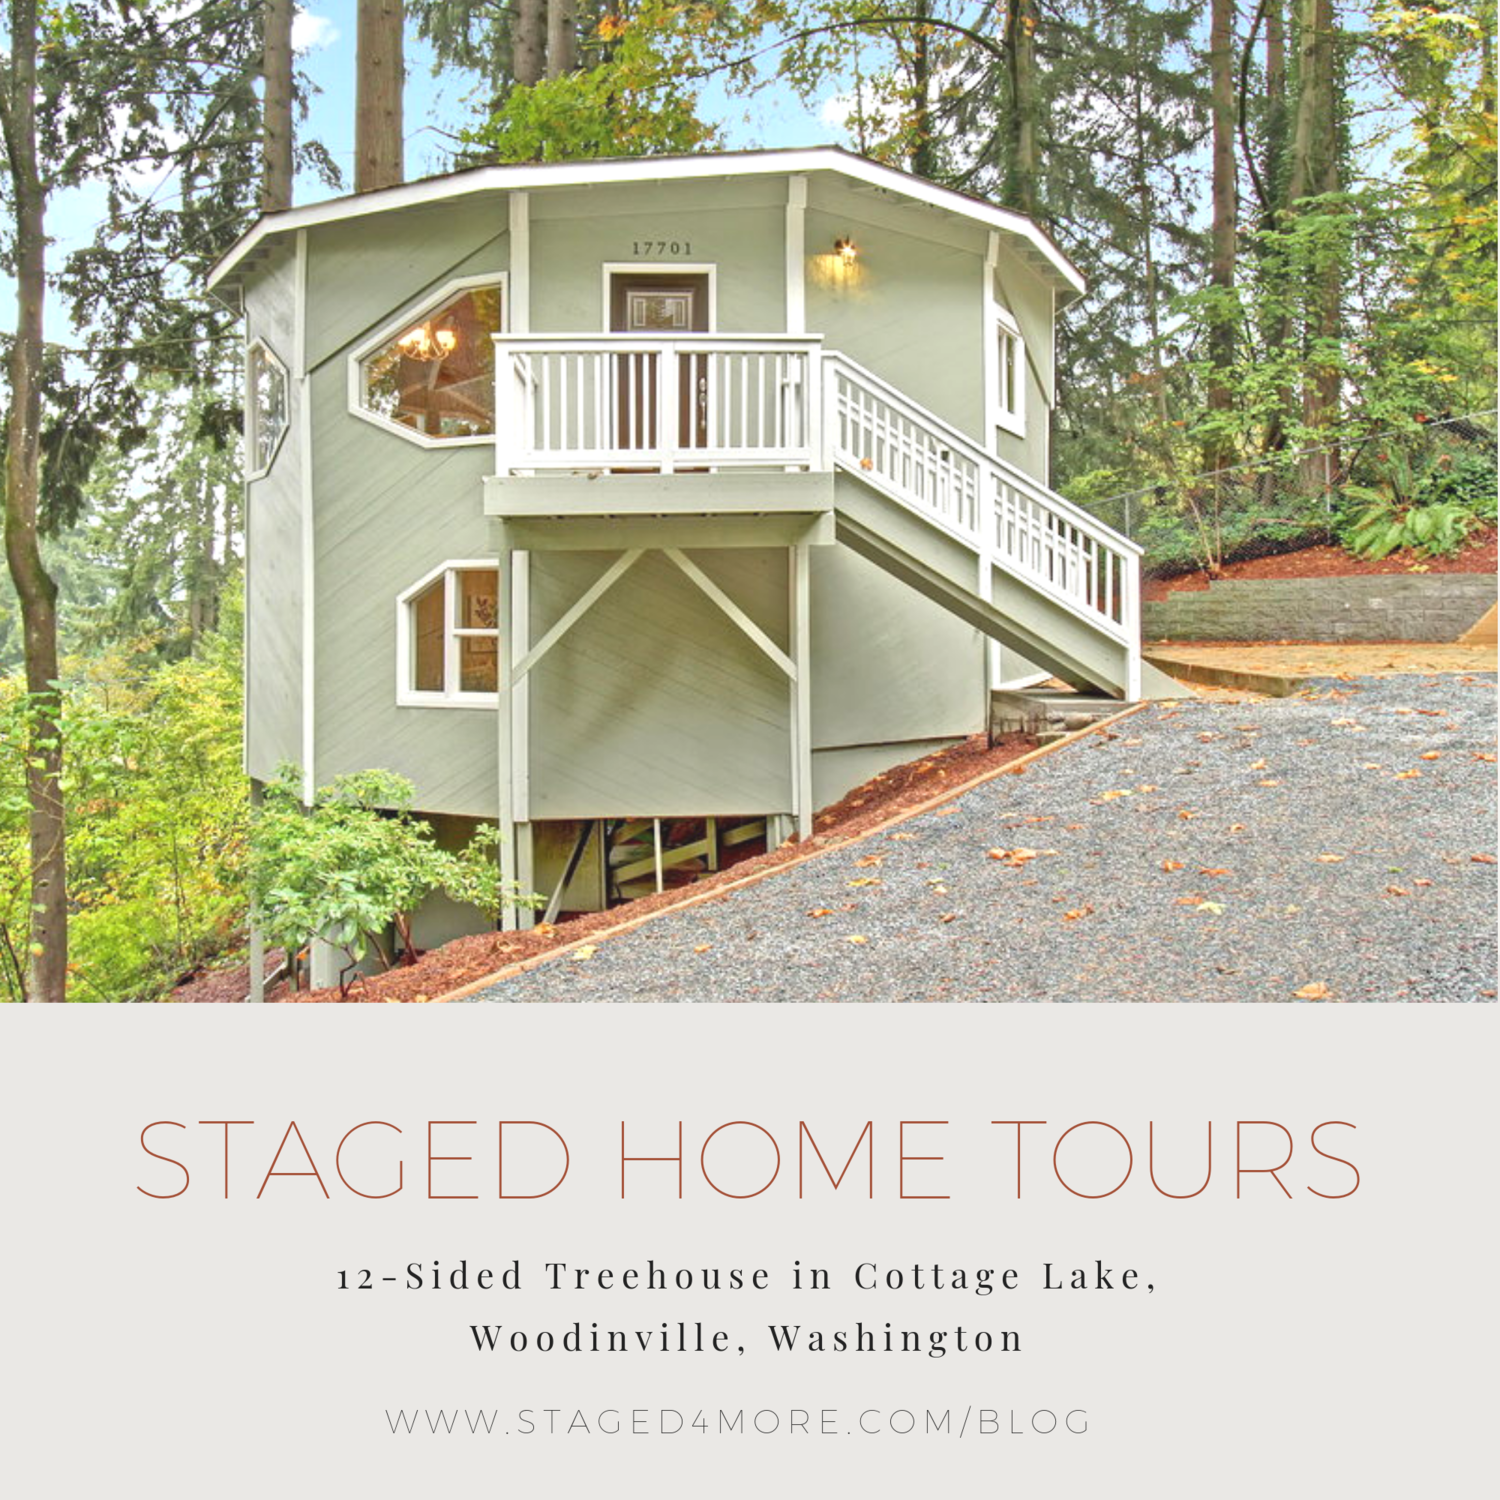 Staged4more+Staged+Home+Tour+Woodinville+Cottage+Lake+Washington+Tree+House